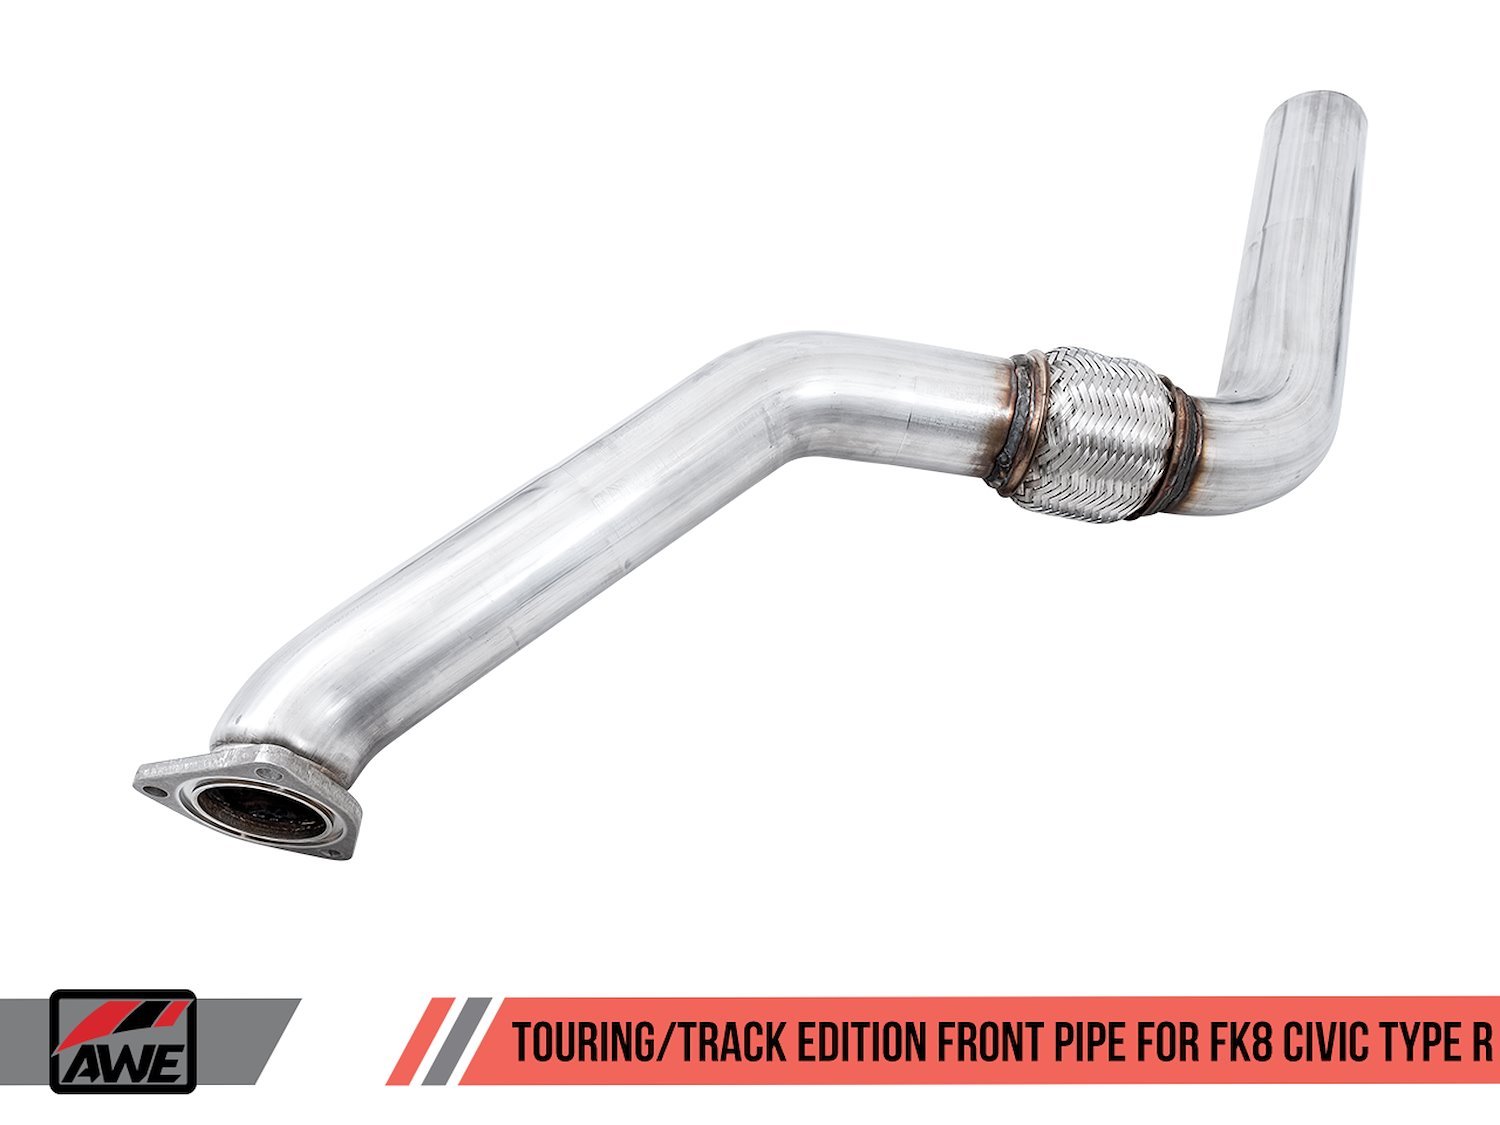 AWE Touring Edition Exhaust for FK8 Civic Type R (includes Front Pipe) - Triple Diamond Black Tips